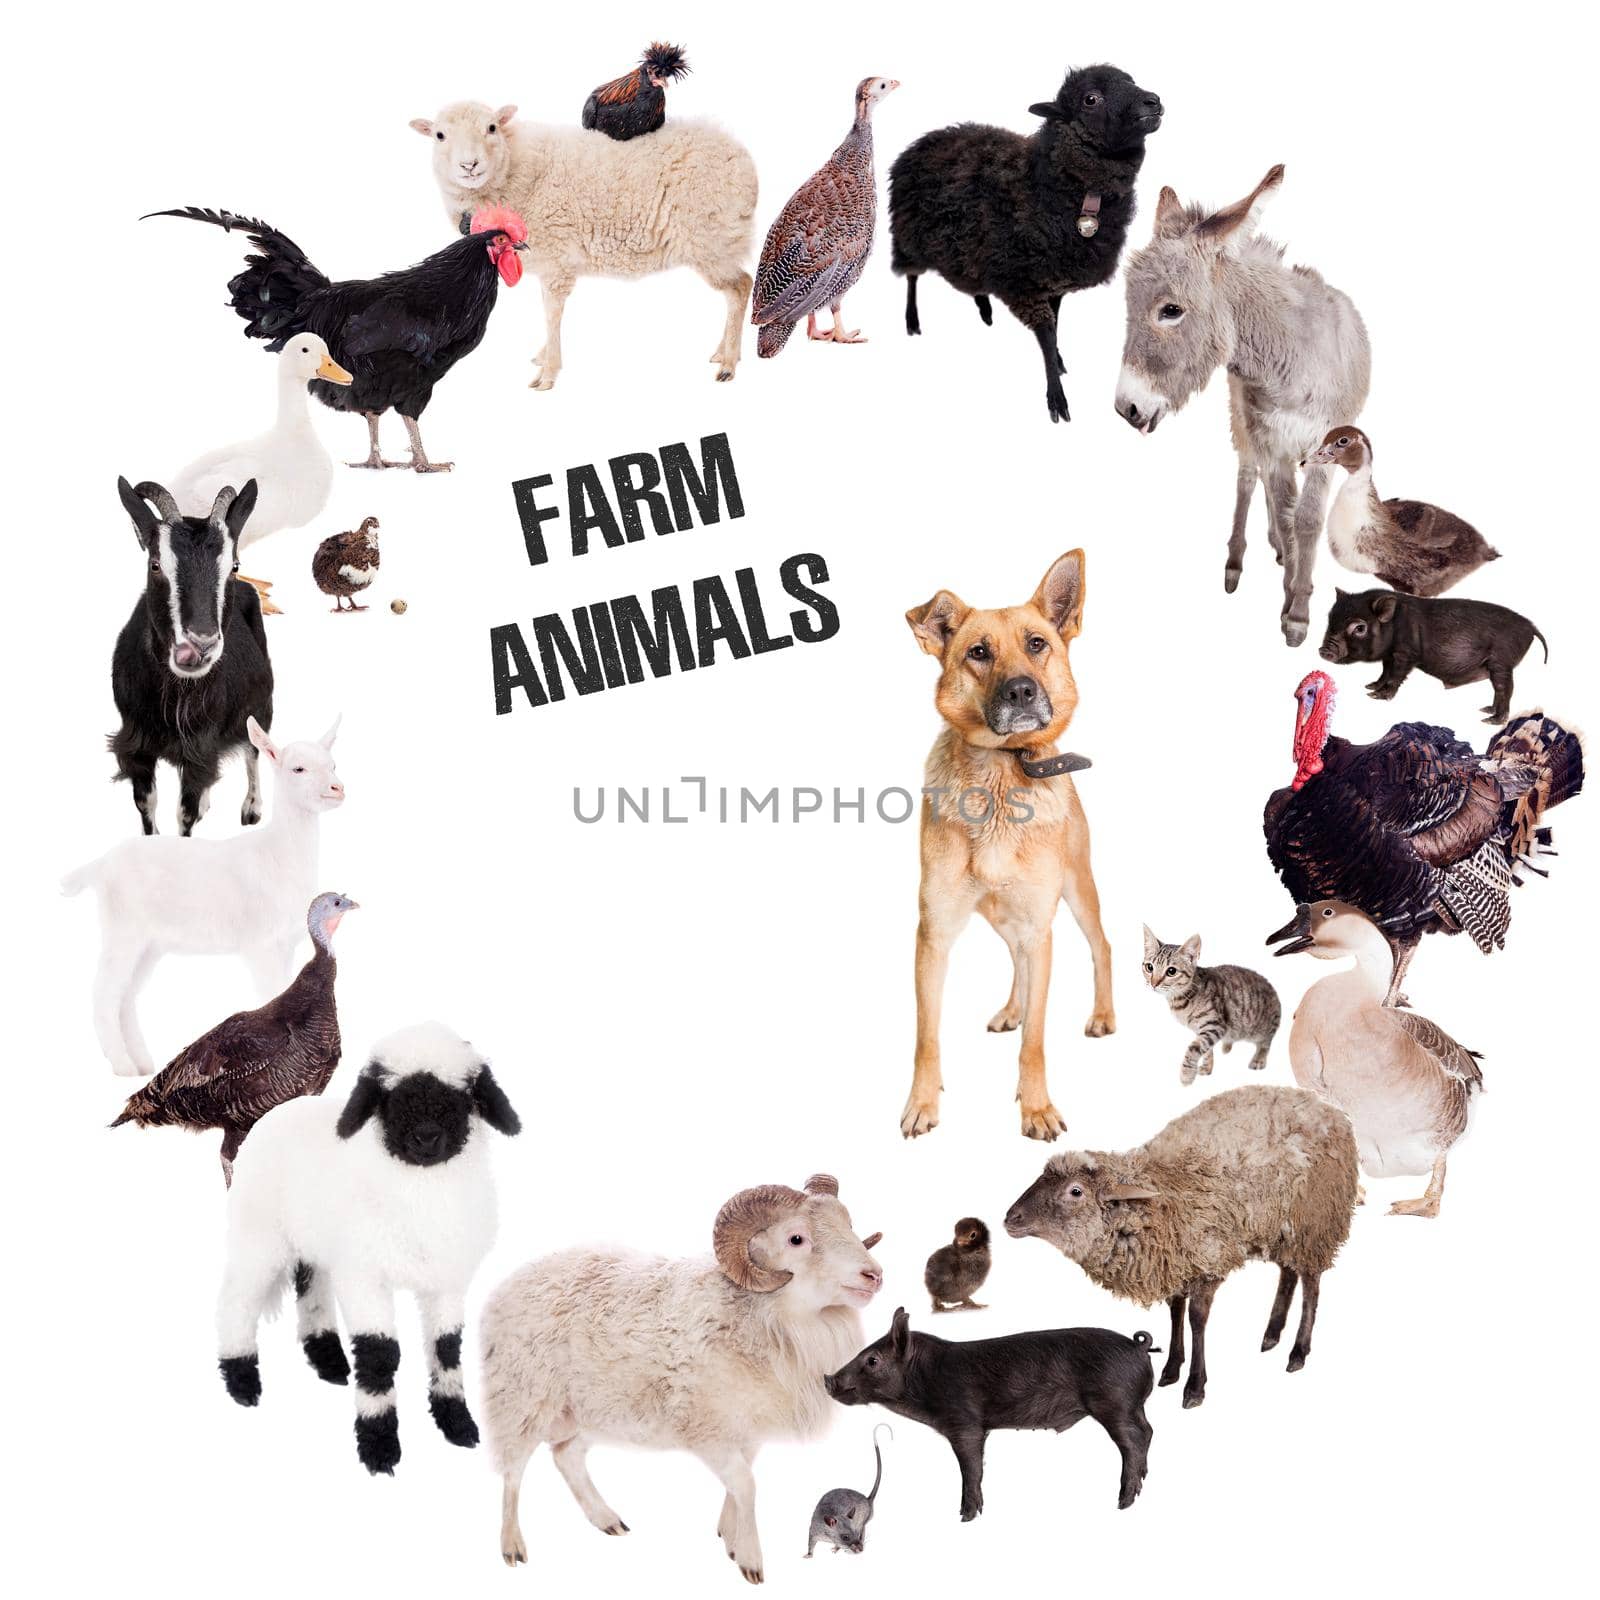 Different farm animals set on white background by RosaJay